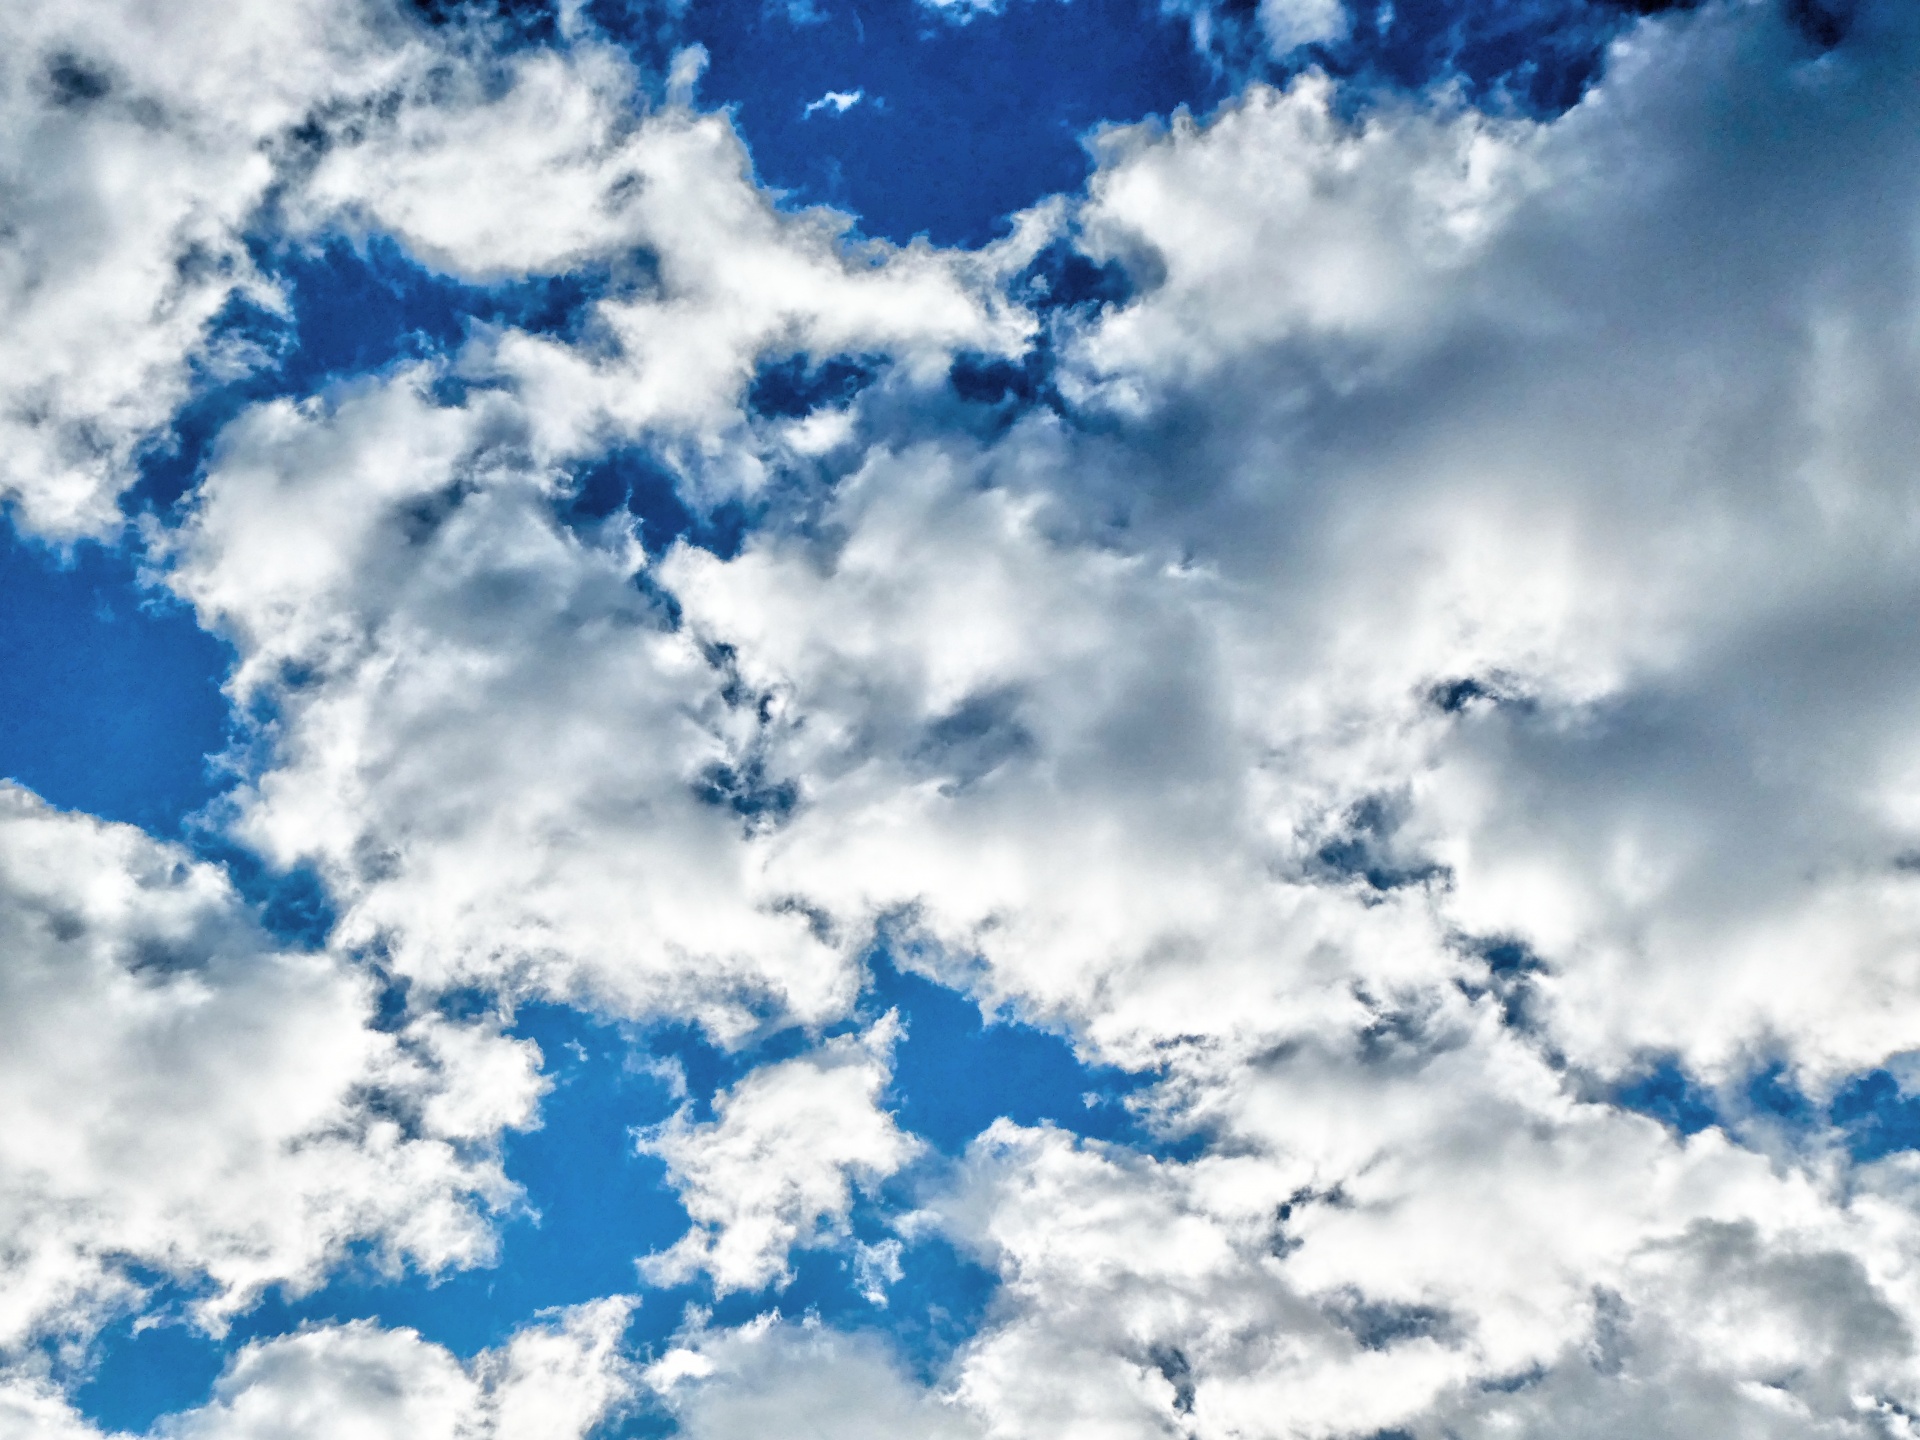 wallpaper created from photo of blue sky full of small white clouds